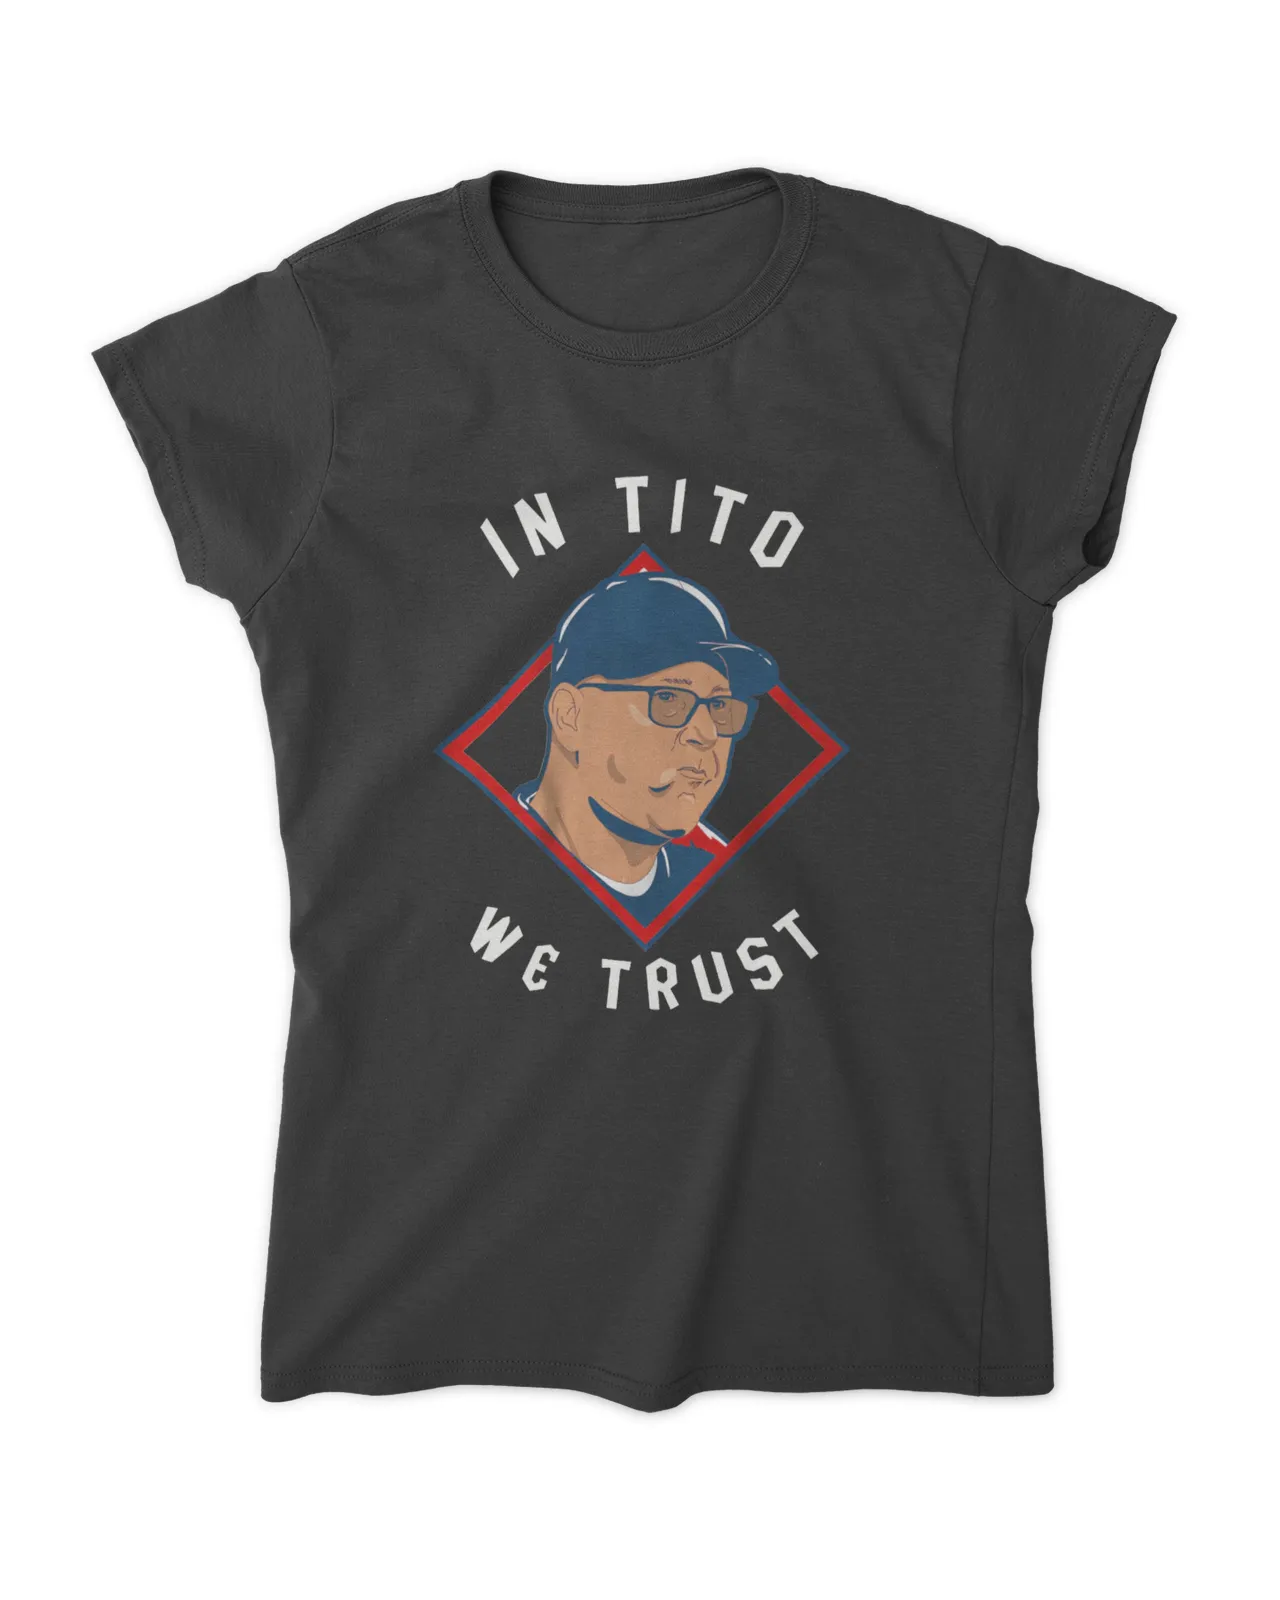 Terry Francona In Tito We Trust Shirt